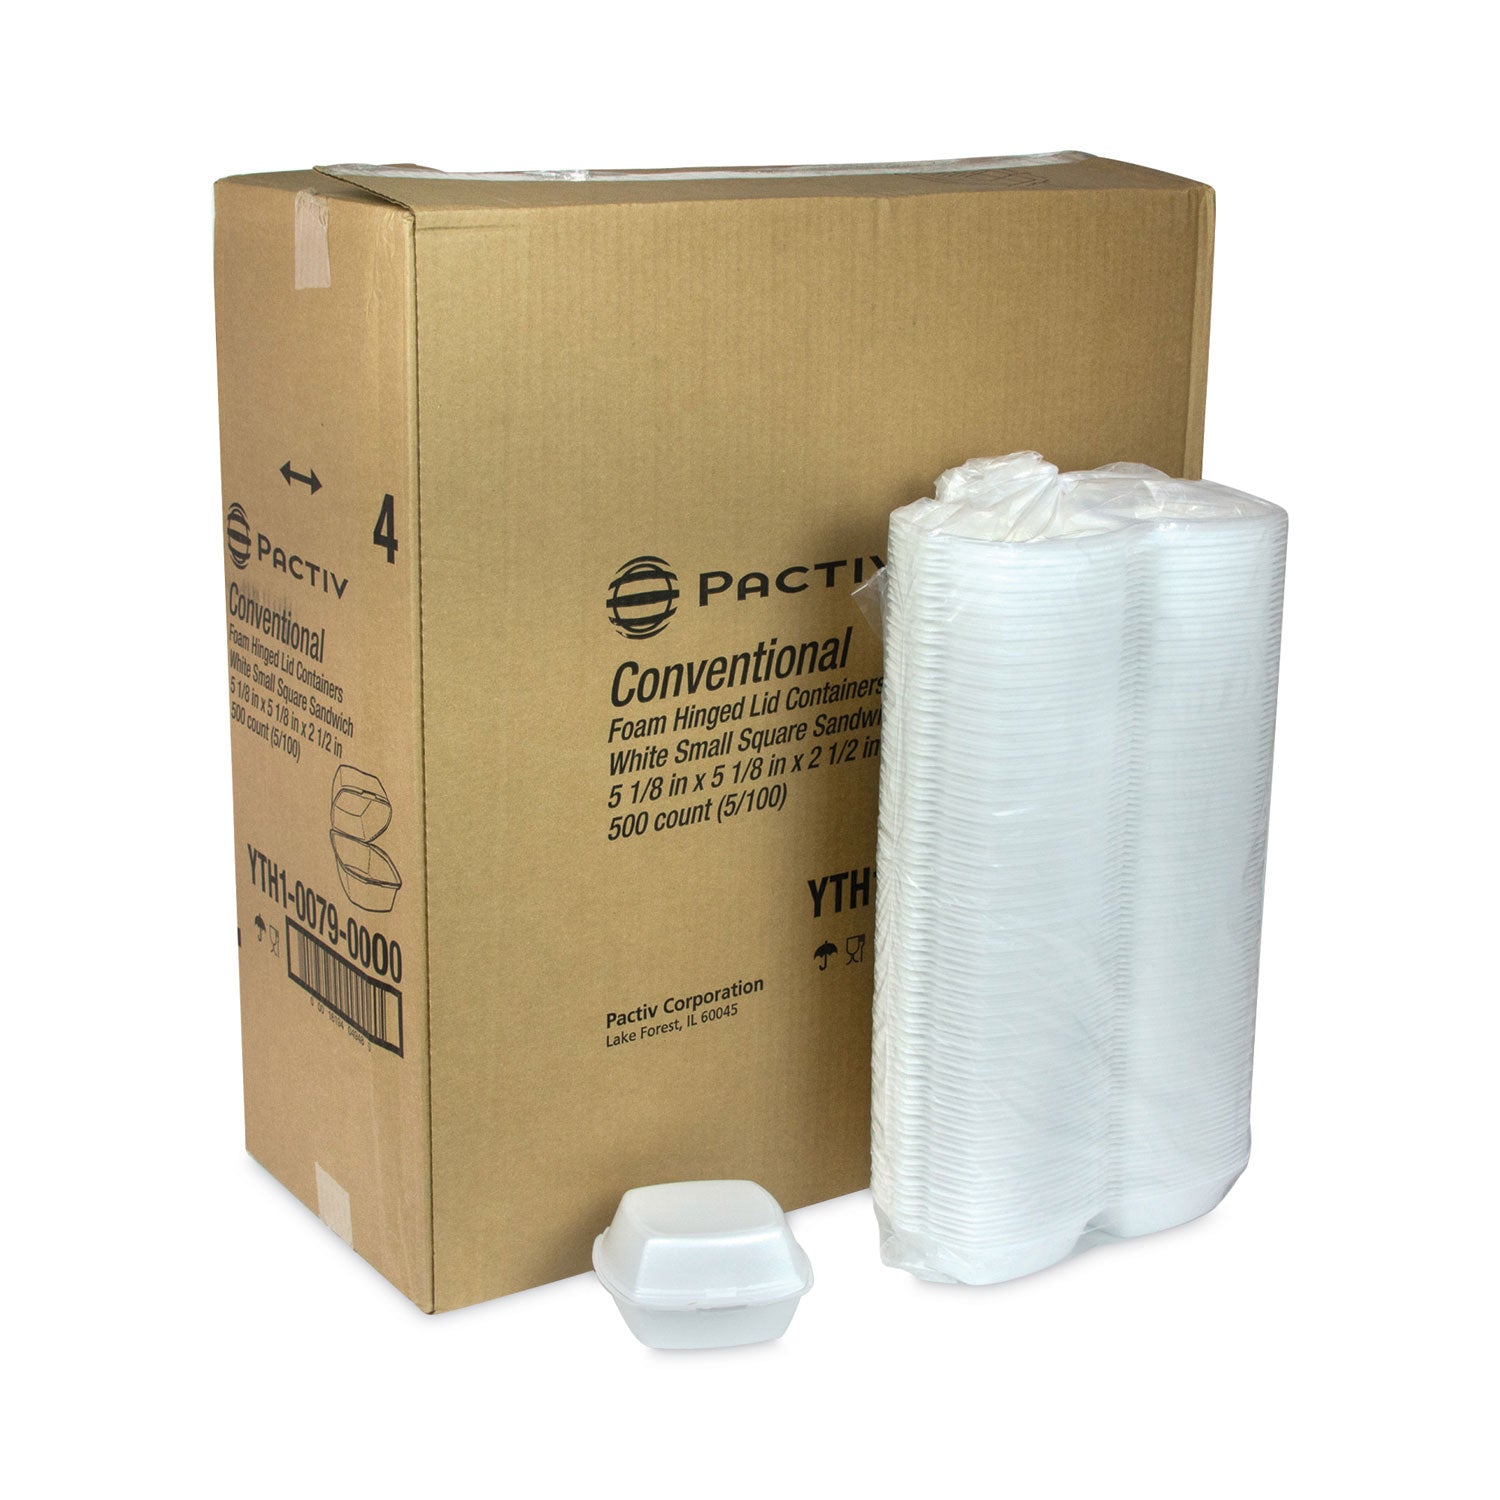 foam-hinged-lid-container-single-tab-lock-513-x-513-x-25-white-500-carton_pctyth100790000 - 4